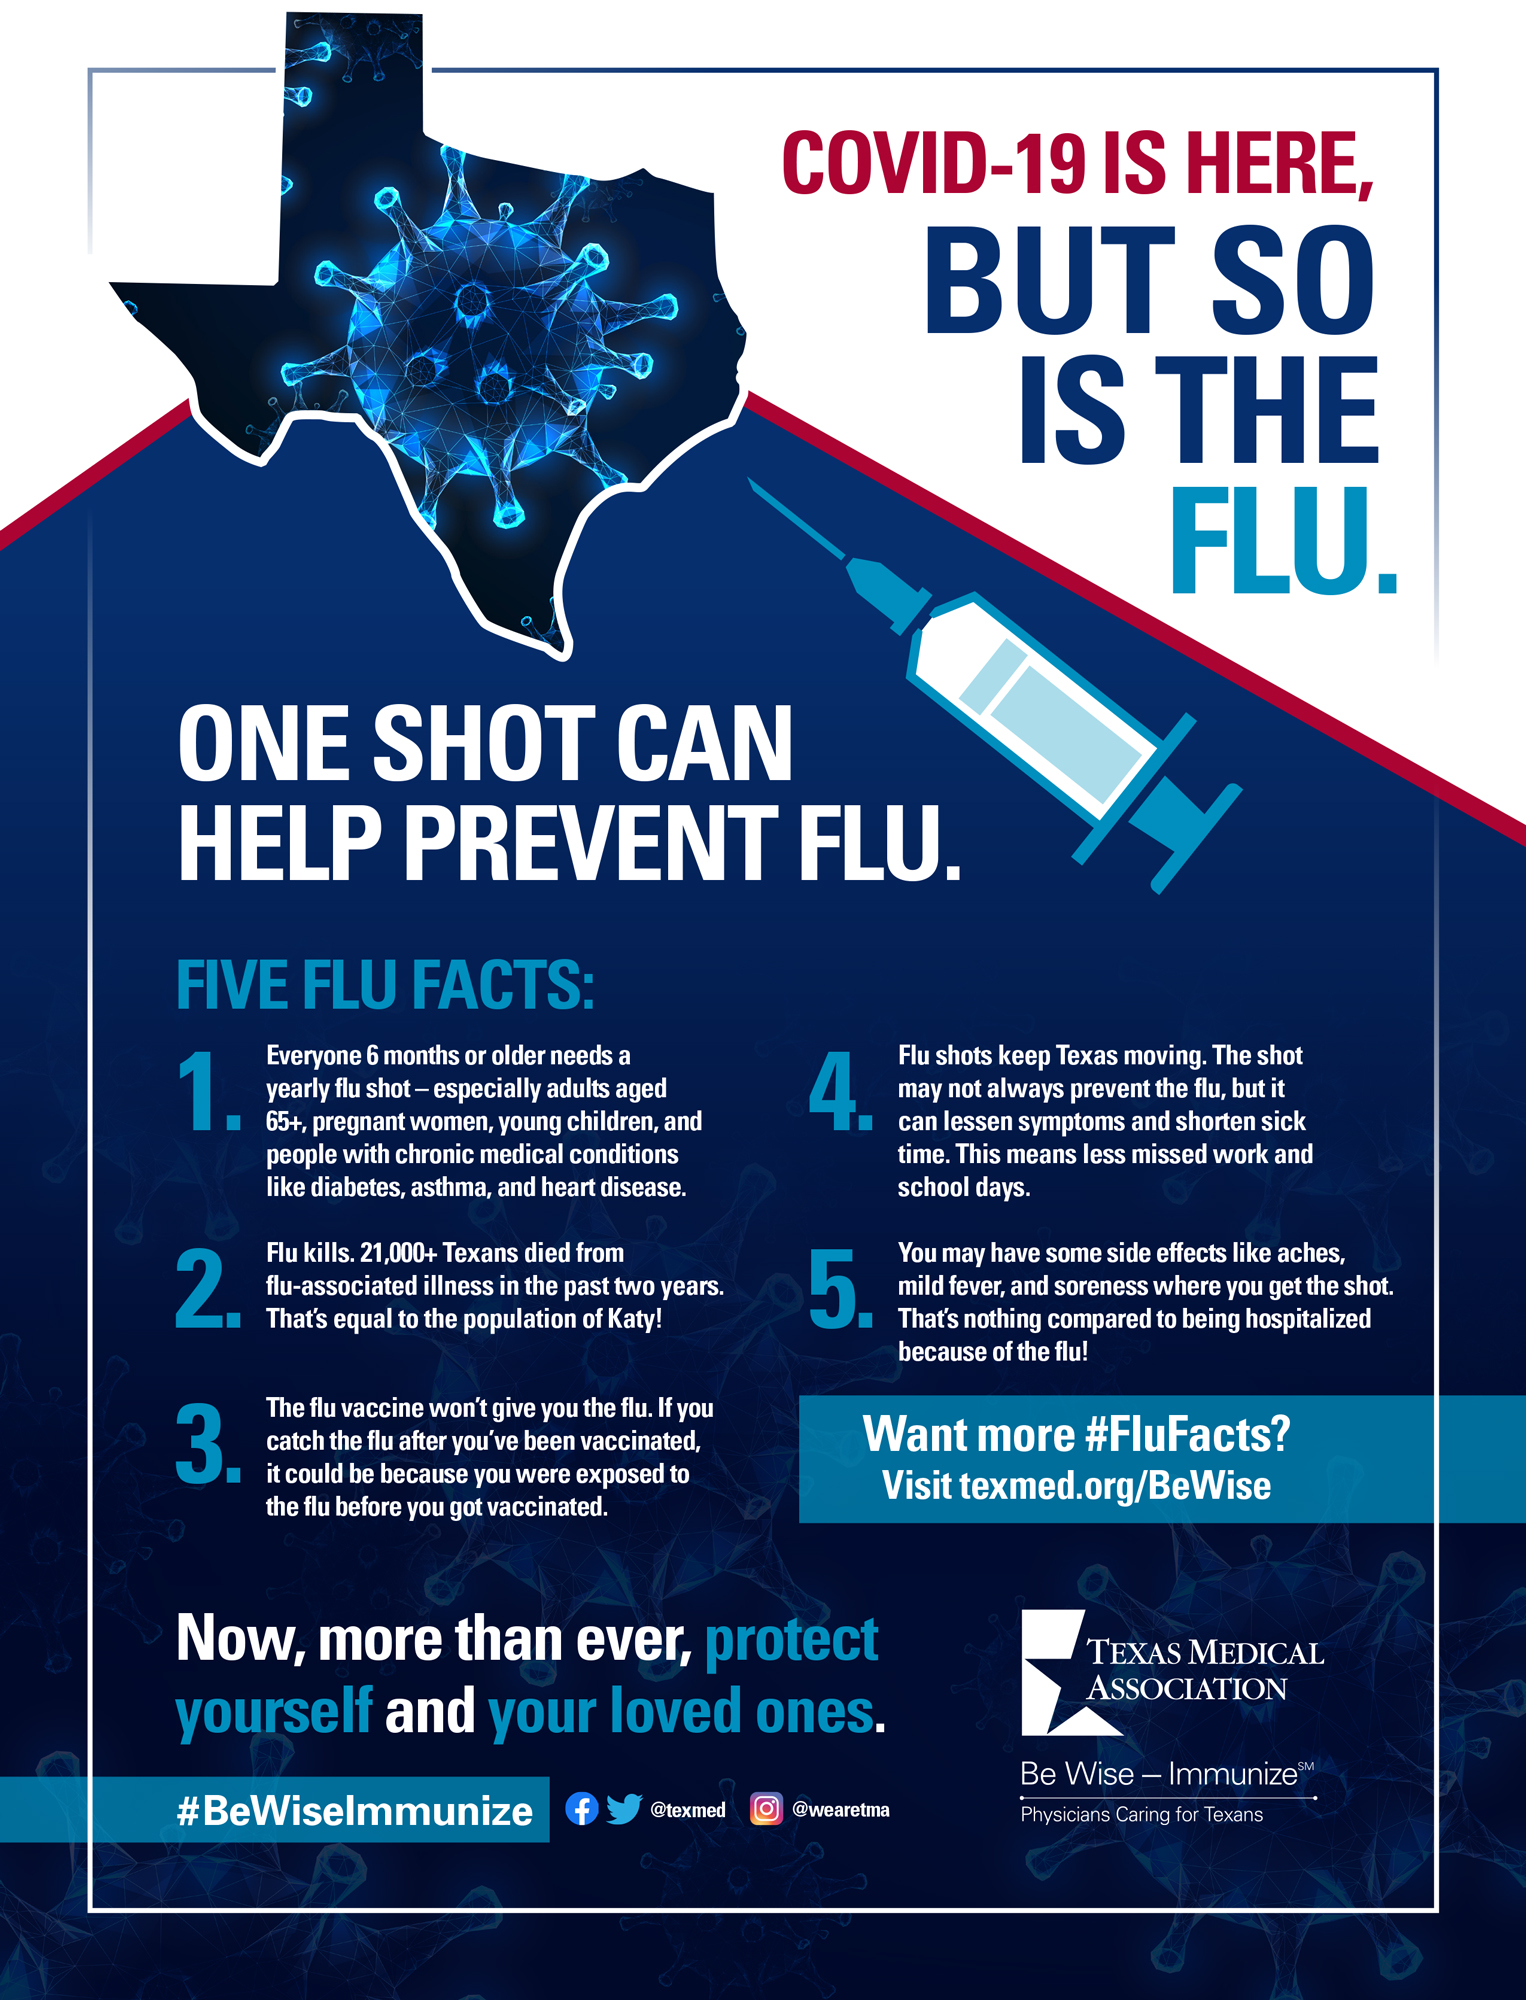 new-poster-encourages-flu-vaccination-amid-covid-19